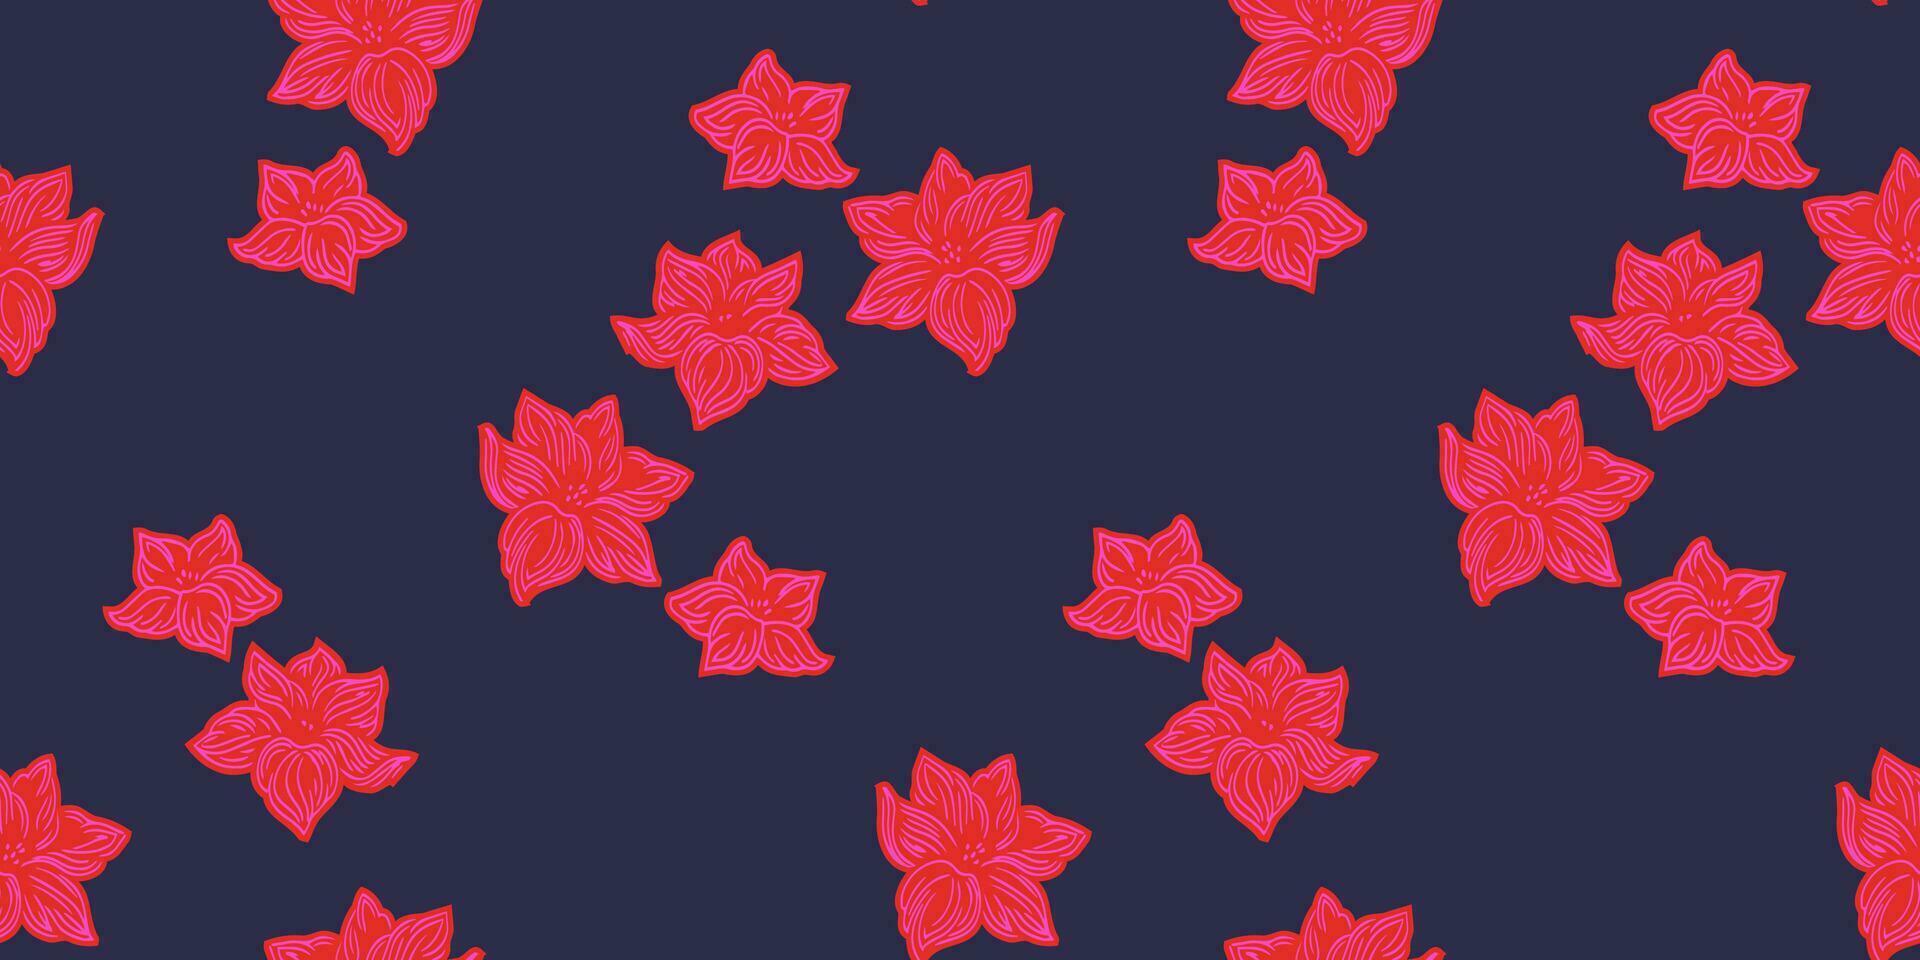 Colorful seamless pattern with decorative stylized shape flowers. Vector hand drawn. Creative abstract pink floral on a dark back. Design for fashion, textile, fabric, wallpaper, surface design